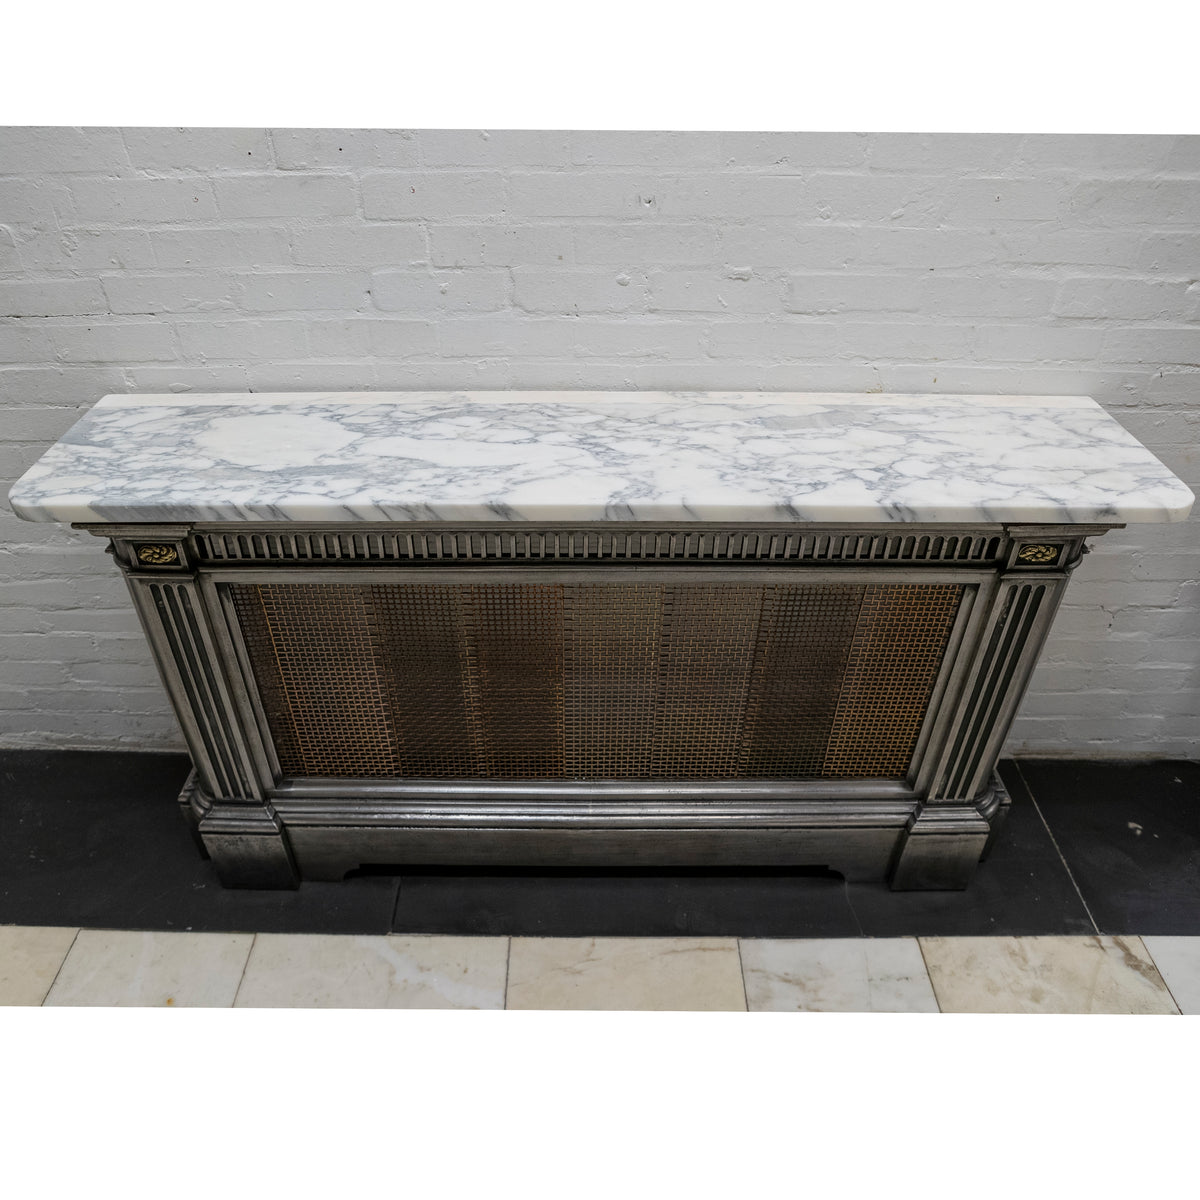 Antique Victorian Radiator Cover | Console Table with Marble Top | The Architectural Forum